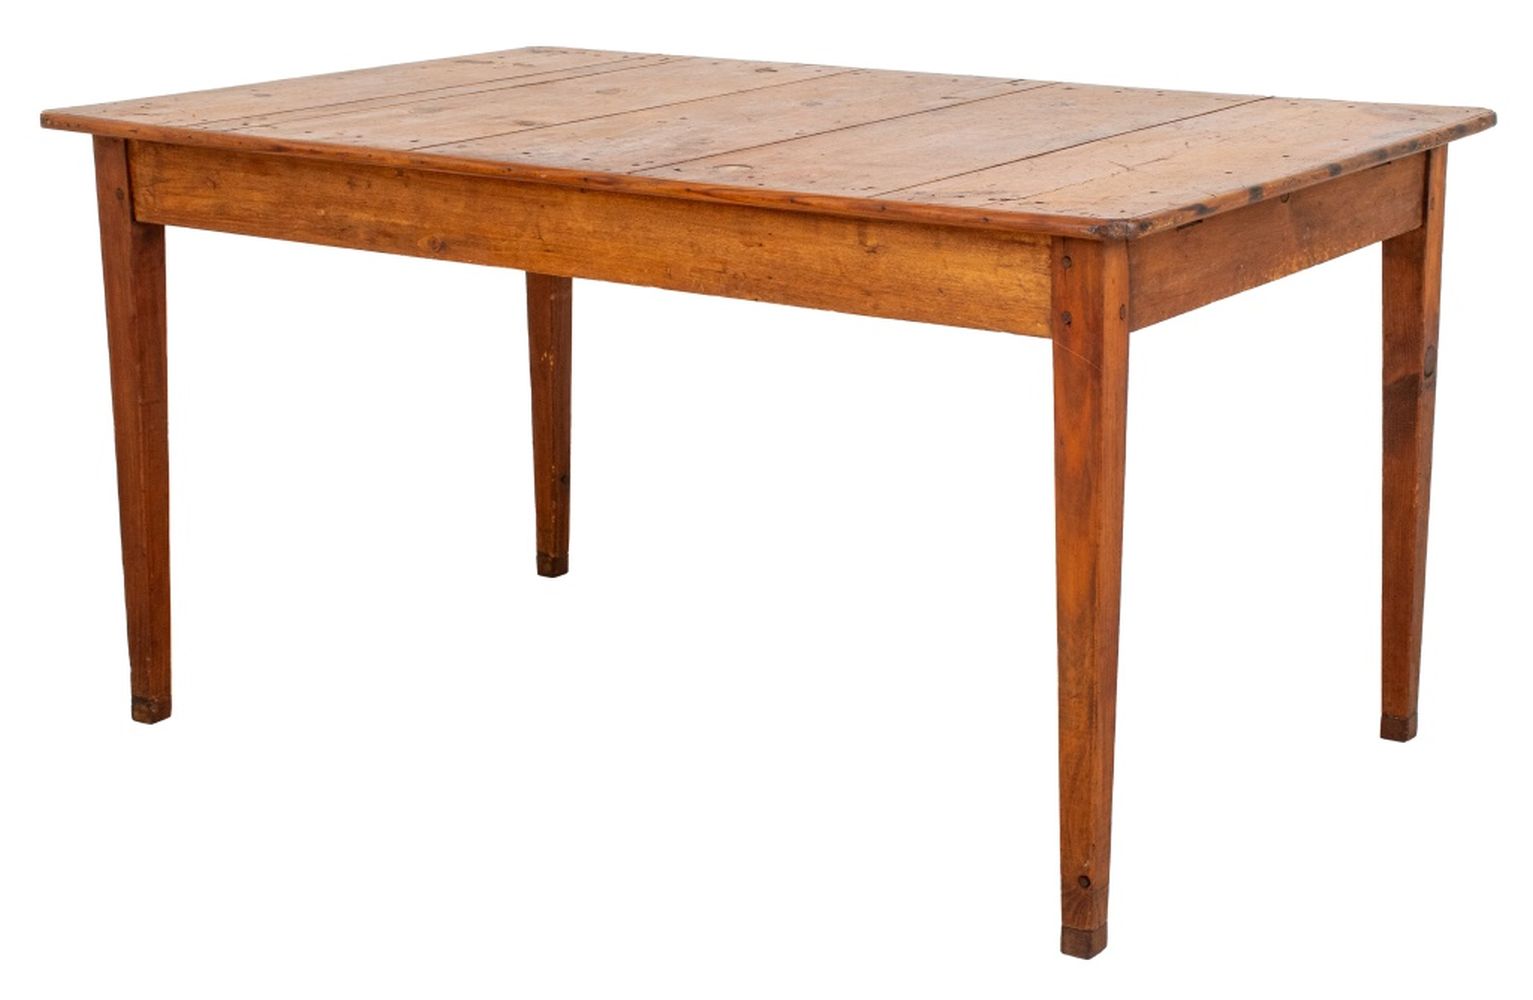 PROVINCIAL COUNTRY PINE TABLE  3b4c83